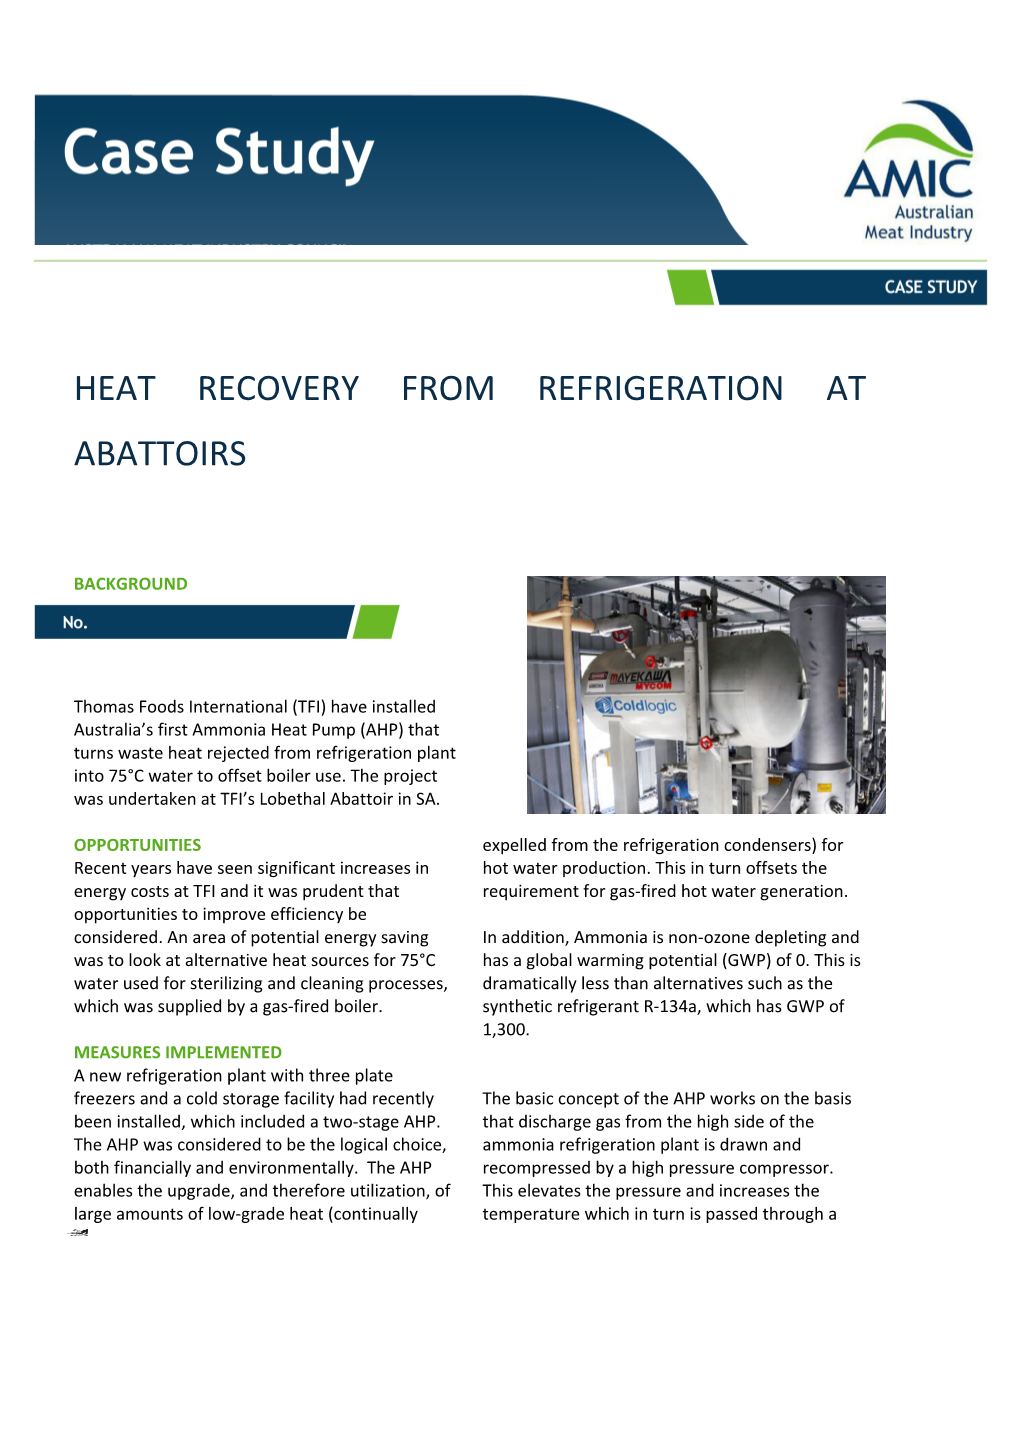 Heat Recovery from Refrigeration at Abattoirs